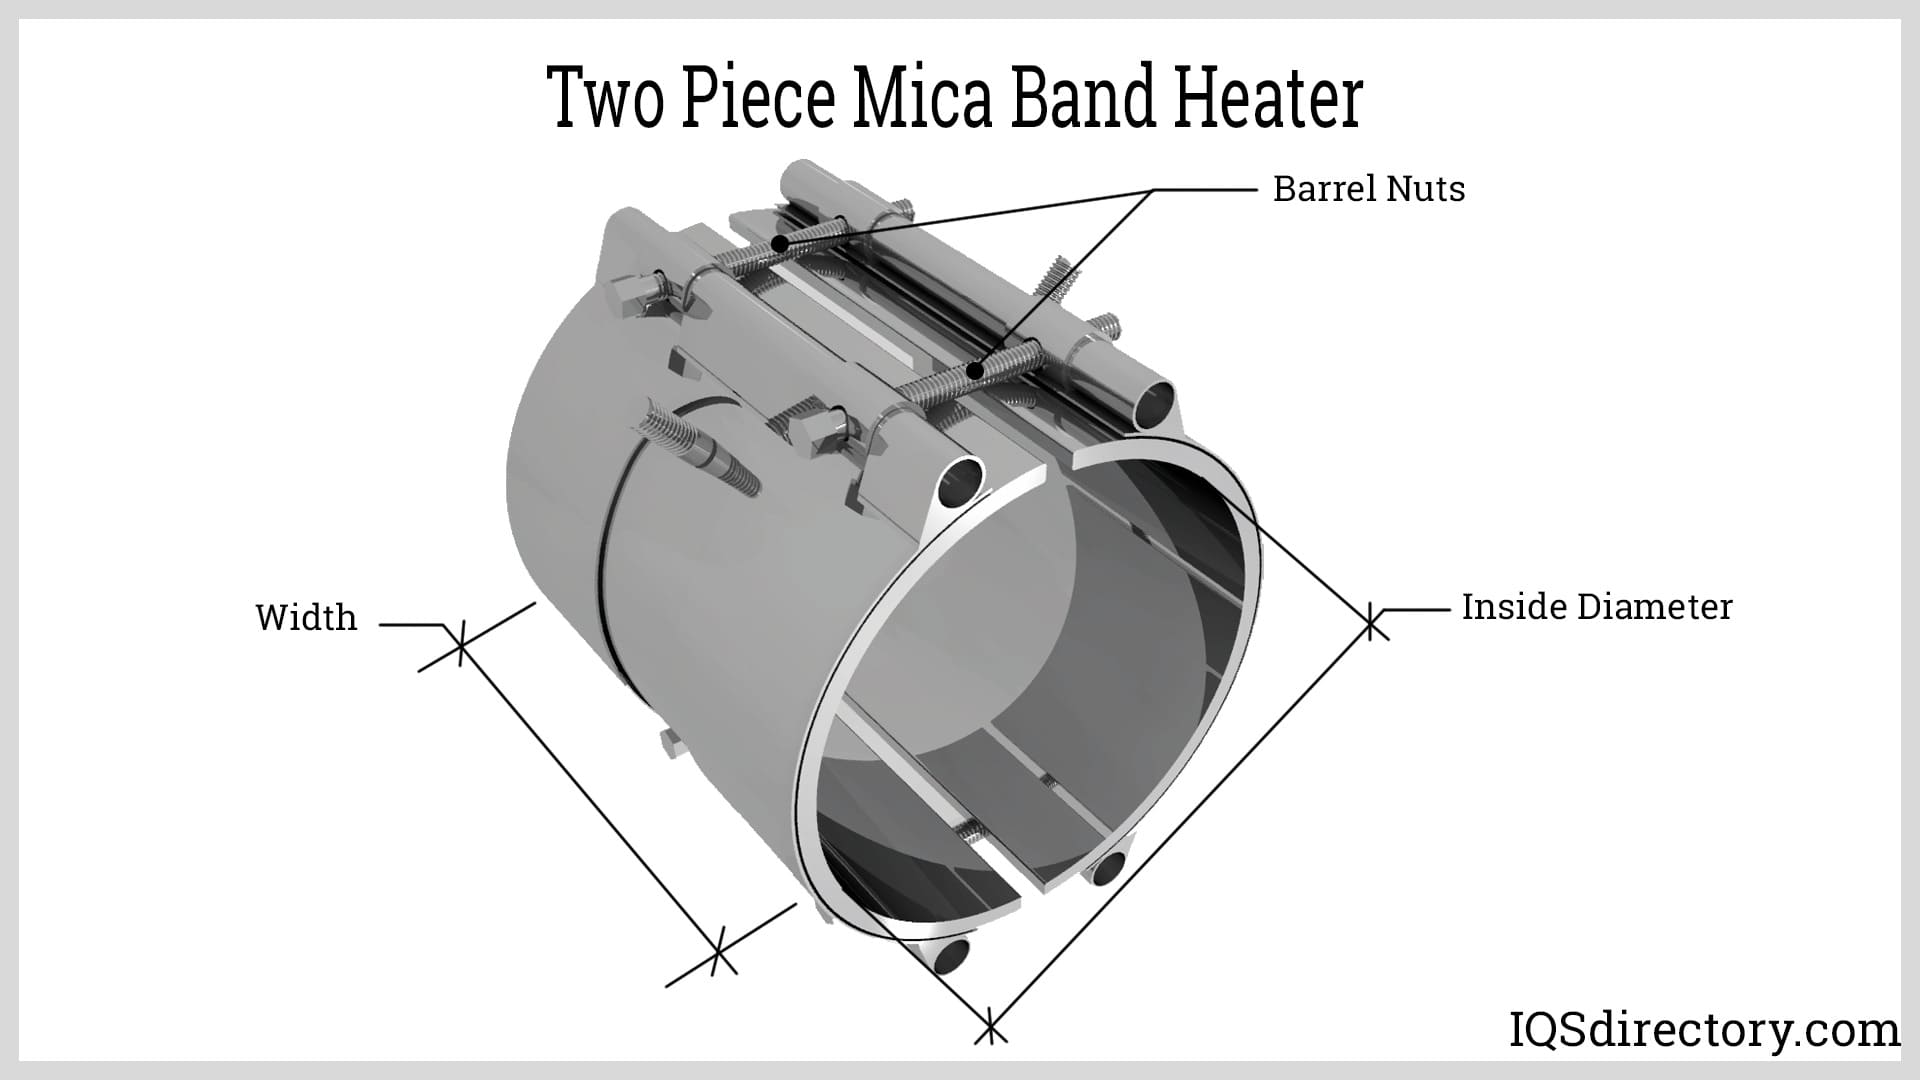 Two Piece Mica Band Heater